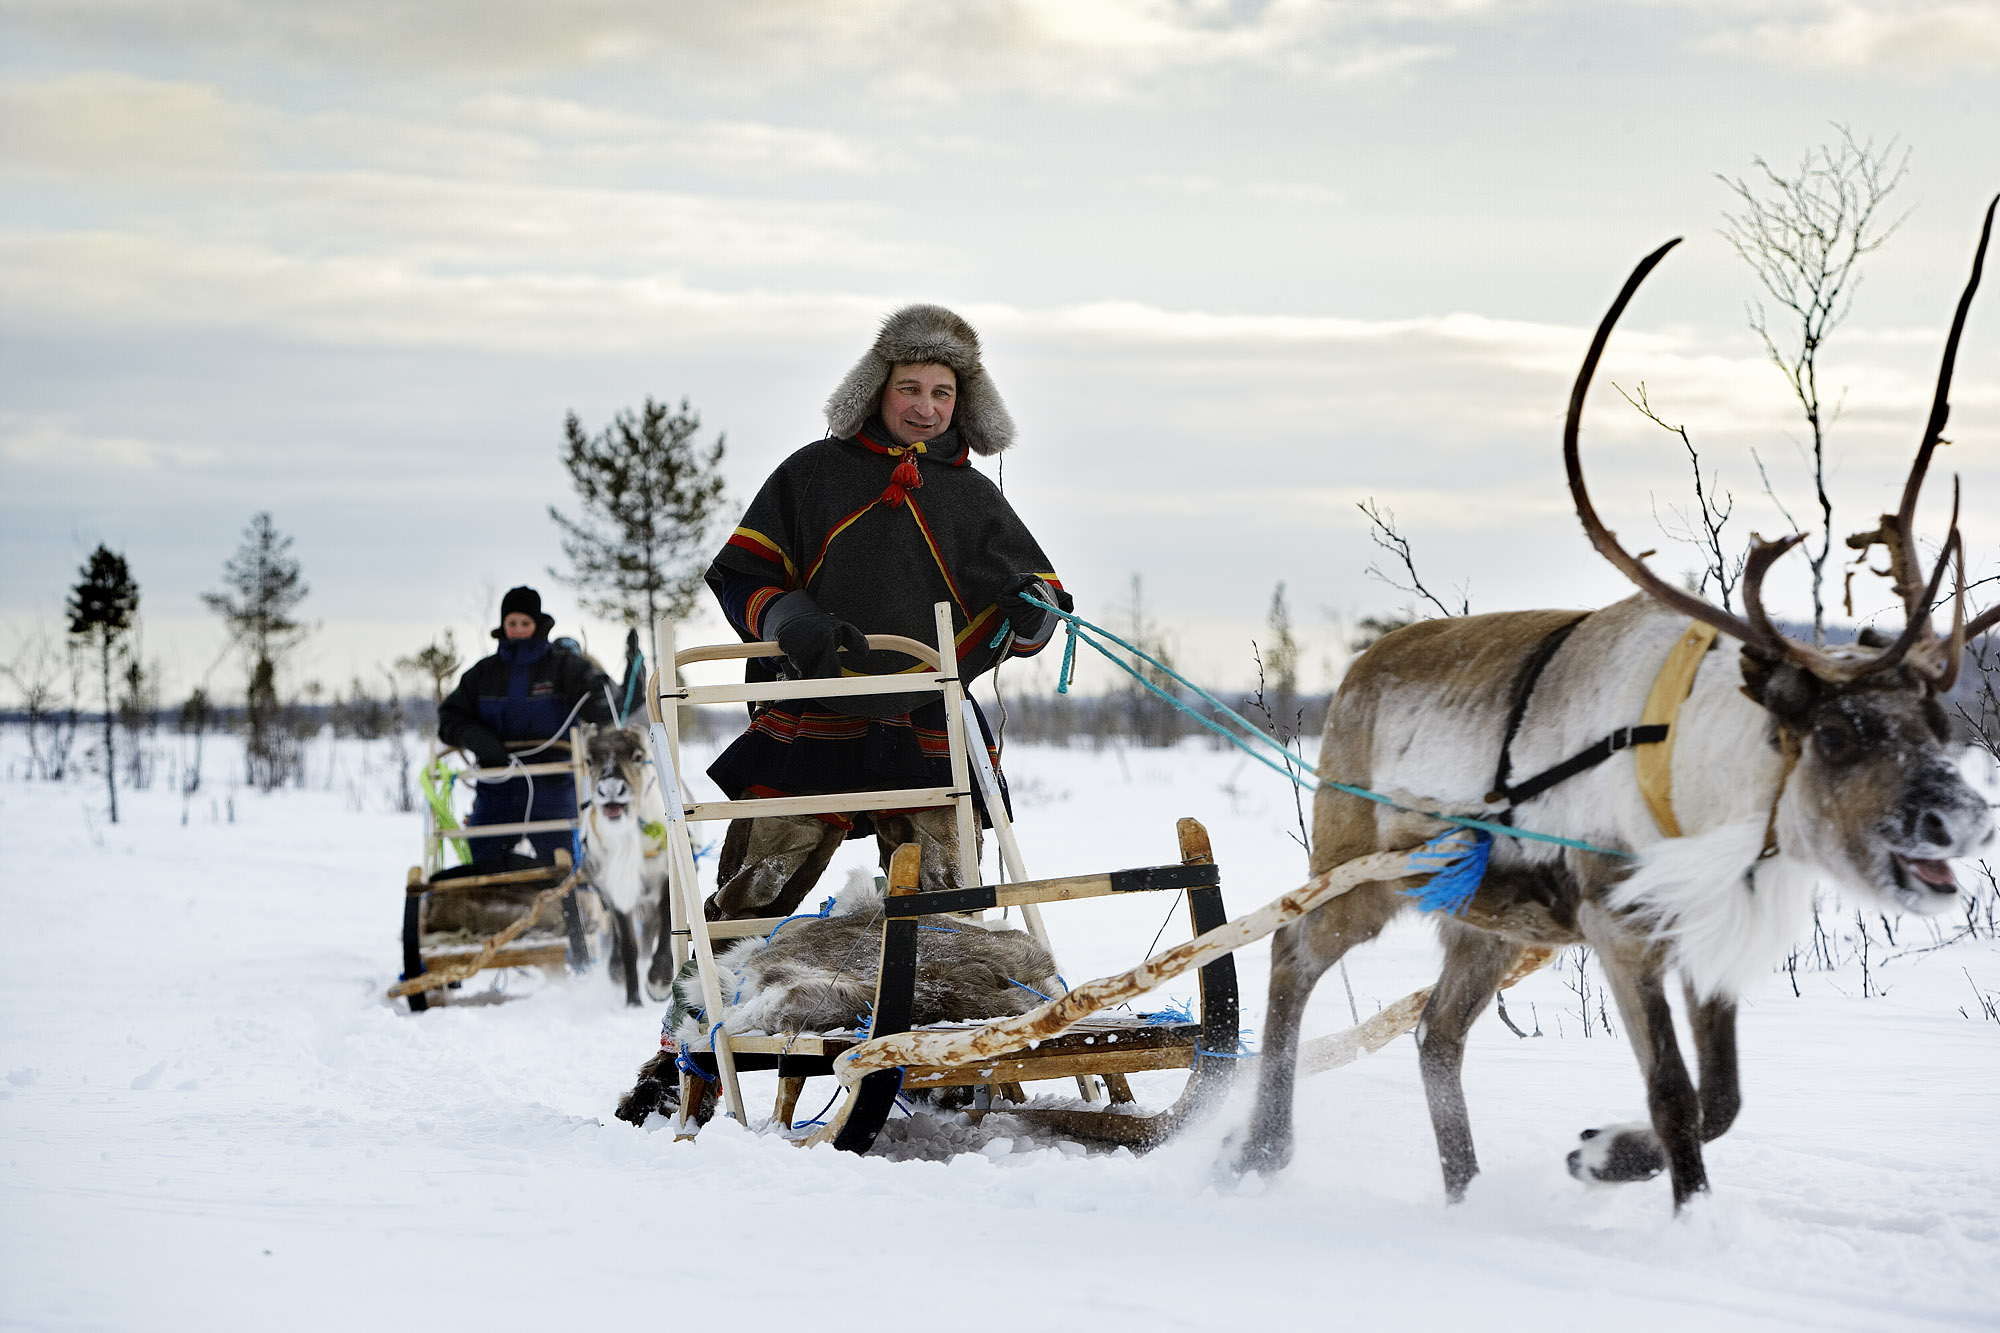 Nils Nutti and guests are sledding with reindeer